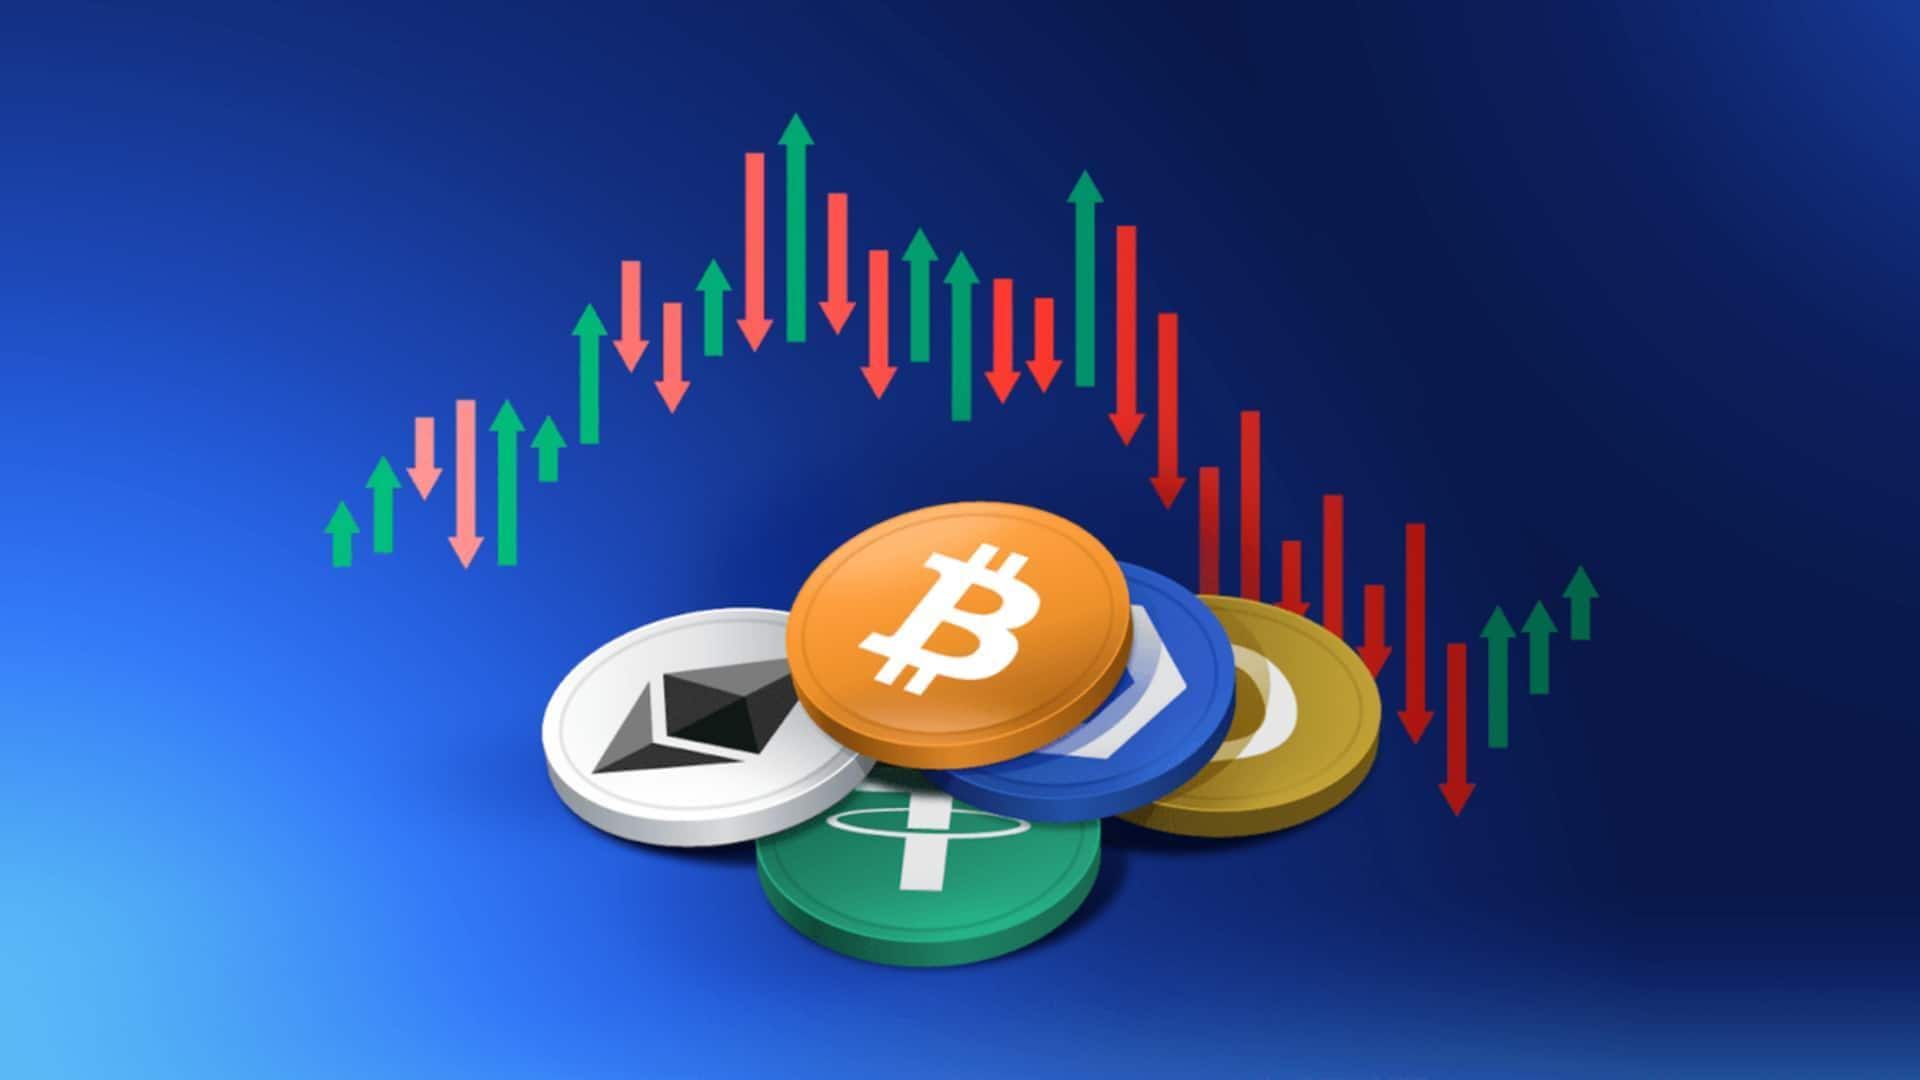 Cryptocurrency prices: Check today's rates of Bitcoin, Ethereum, Dogecoin, Tether